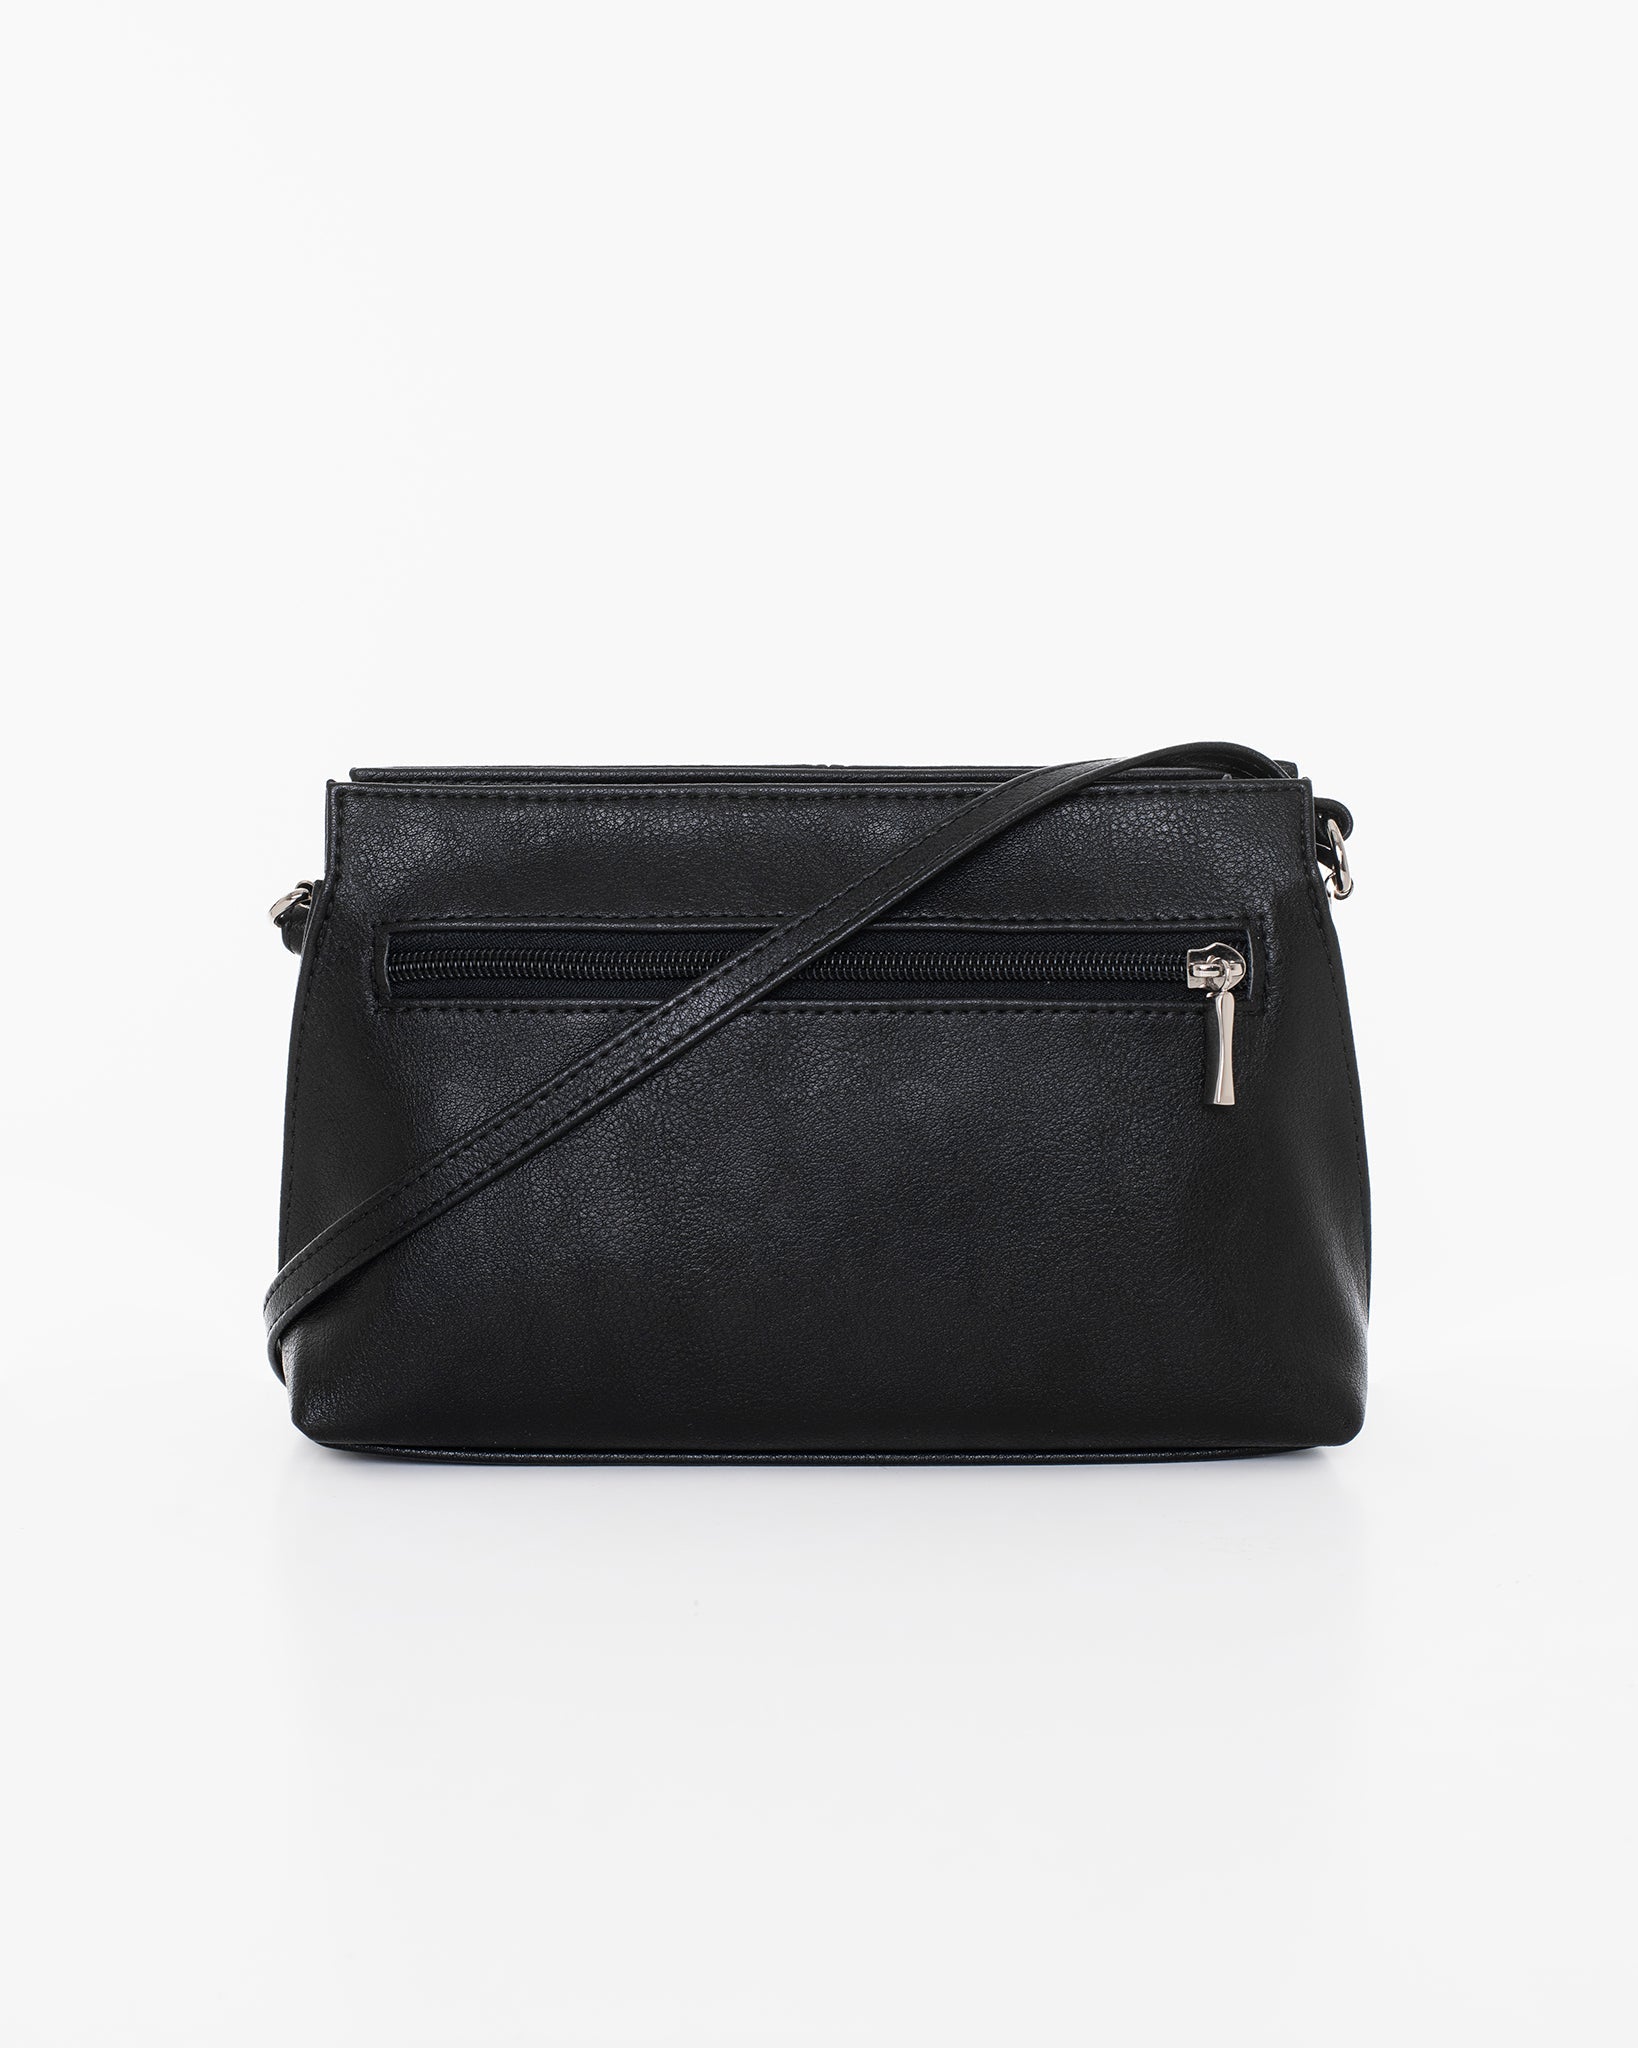 Small black leather shoulder bag by Nabo, featuring three zippered pockets and a 145 cm max strap size. Made in Finland. Dimensions: 23 x 14 x 7 cm.